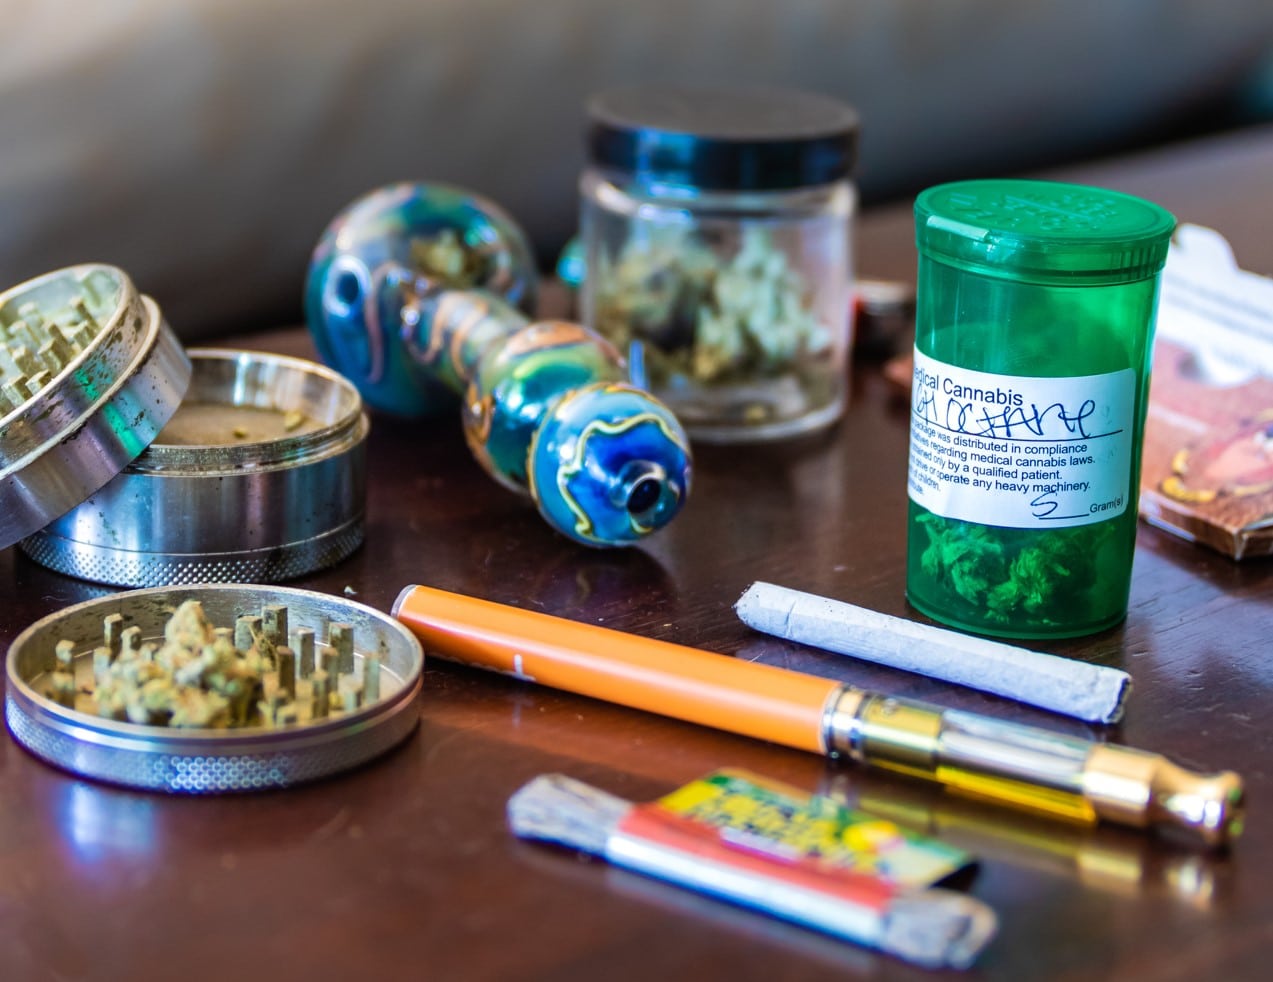 There are different types of cannabis consumption. Budtenders at Mountain Annie's can give you useful advice on which cannabis strains and methods of consumption best work for you.